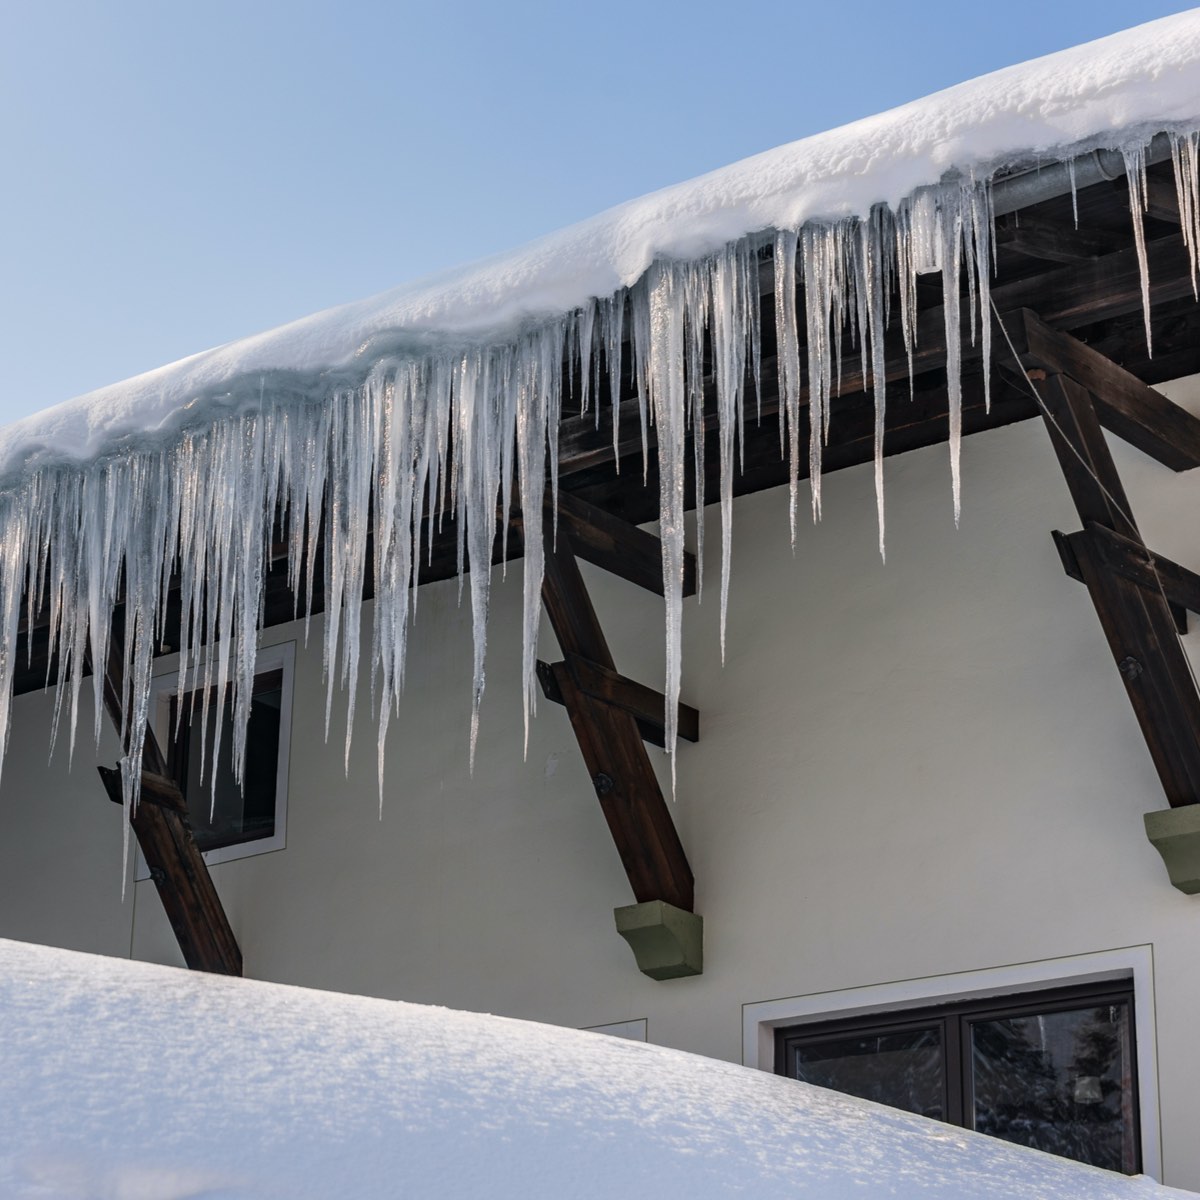 Katy winter roof damage caused by icicles and frozen roofing 